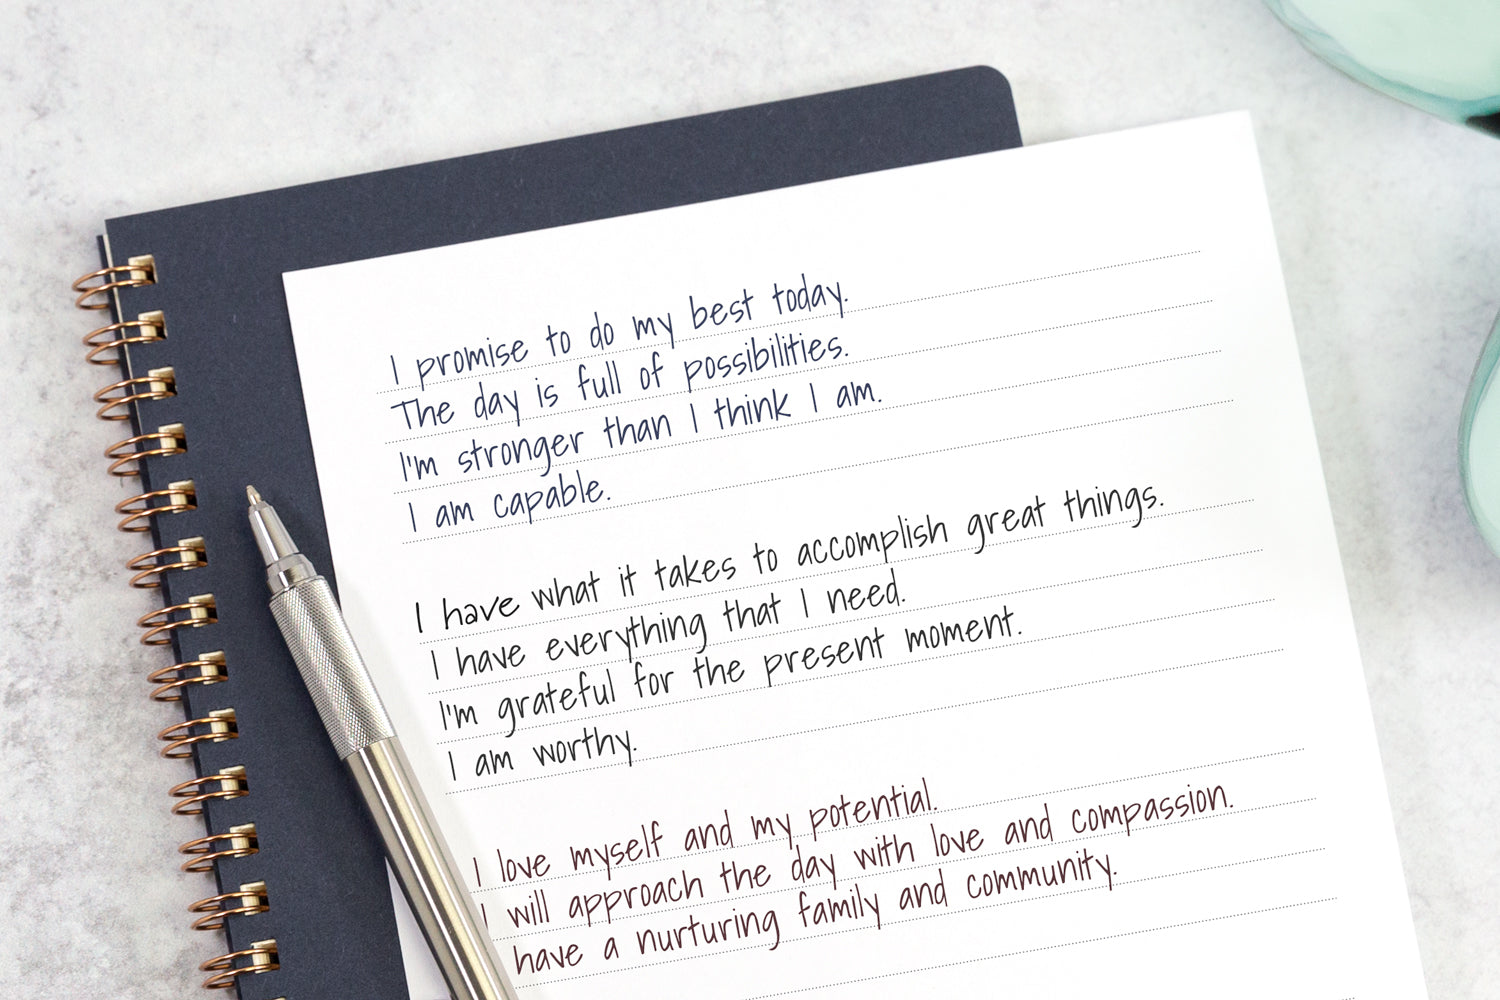 A hand-written list of morning affirmations on white notebook paper.